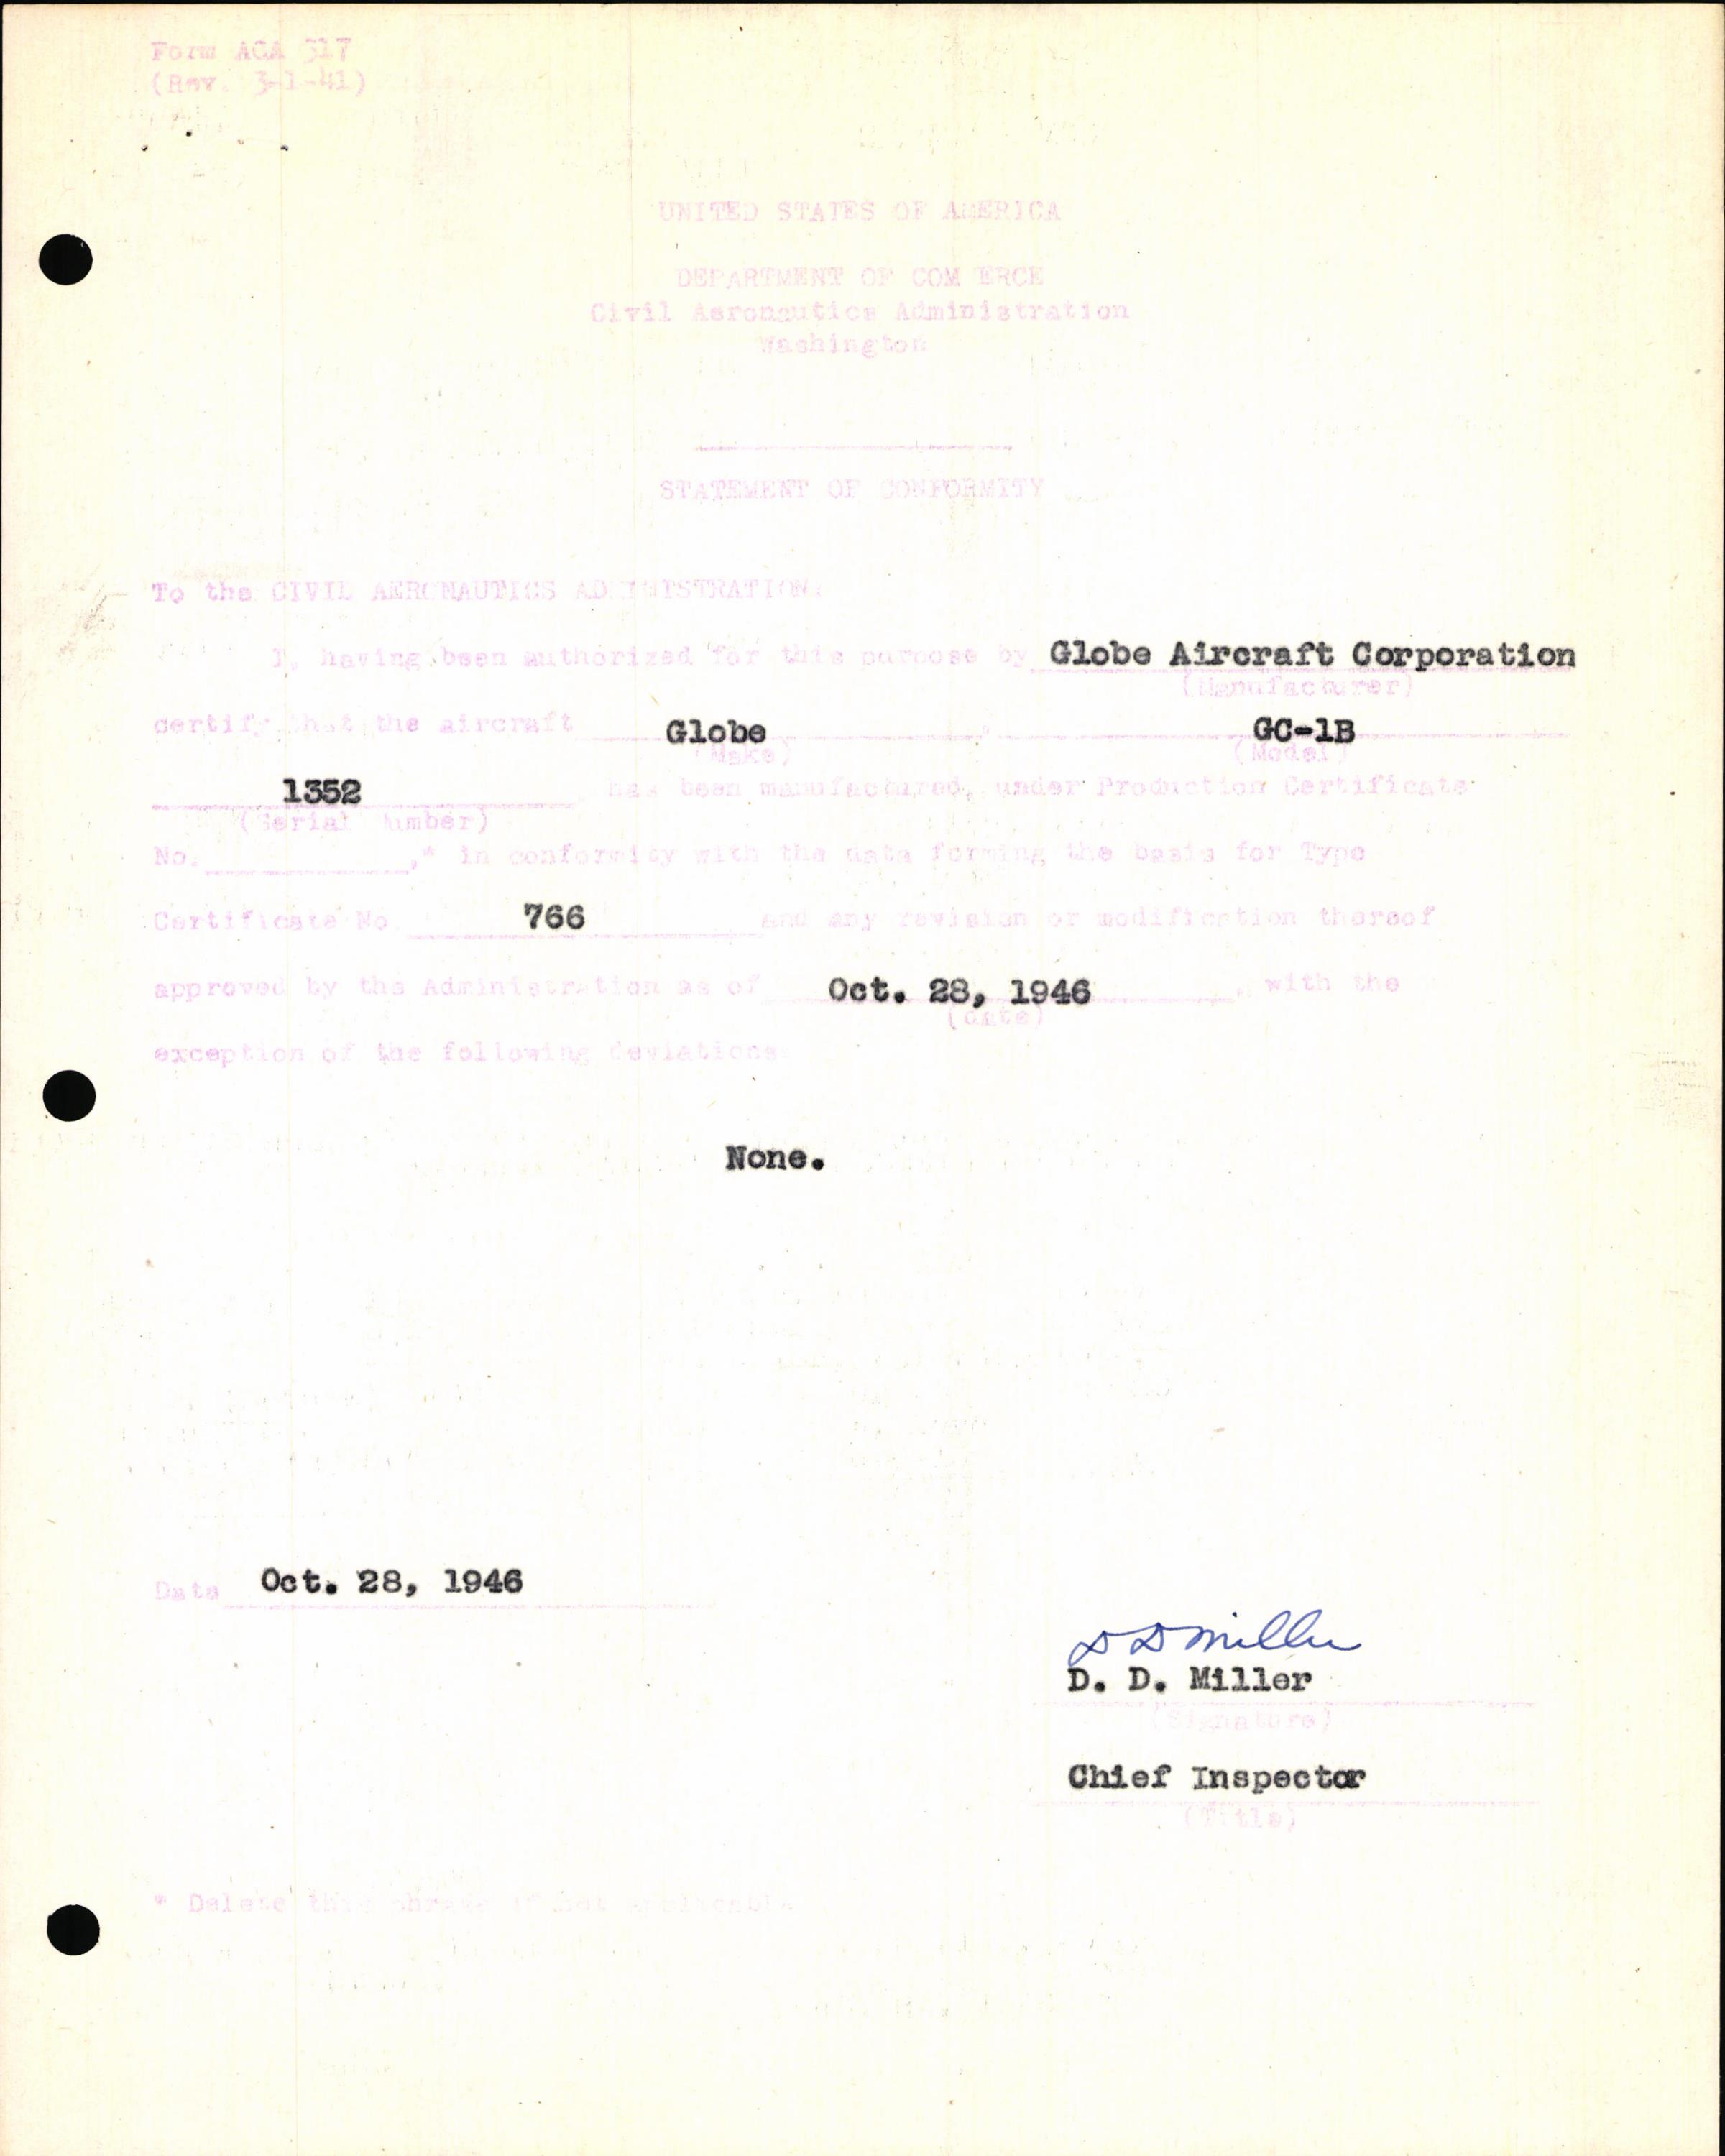 Sample page 5 from AirCorps Library document: Technical Information for Serial Number 1352